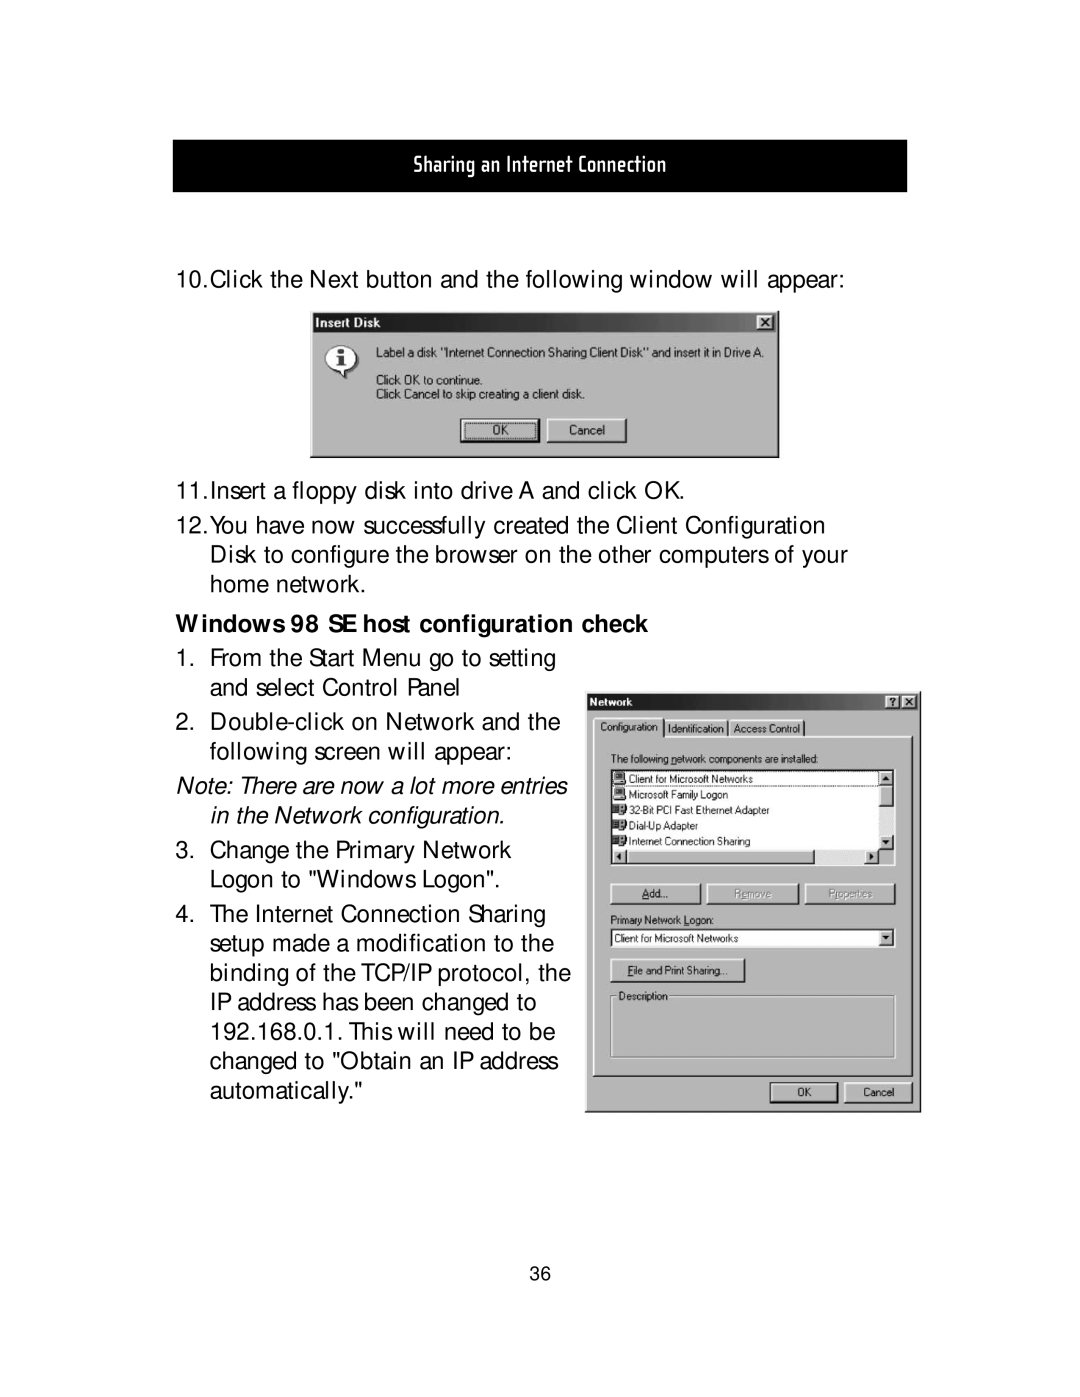 Belkin F5D5000t manual Windows 98 SE host configuration check, Sharing an Internet Connection 